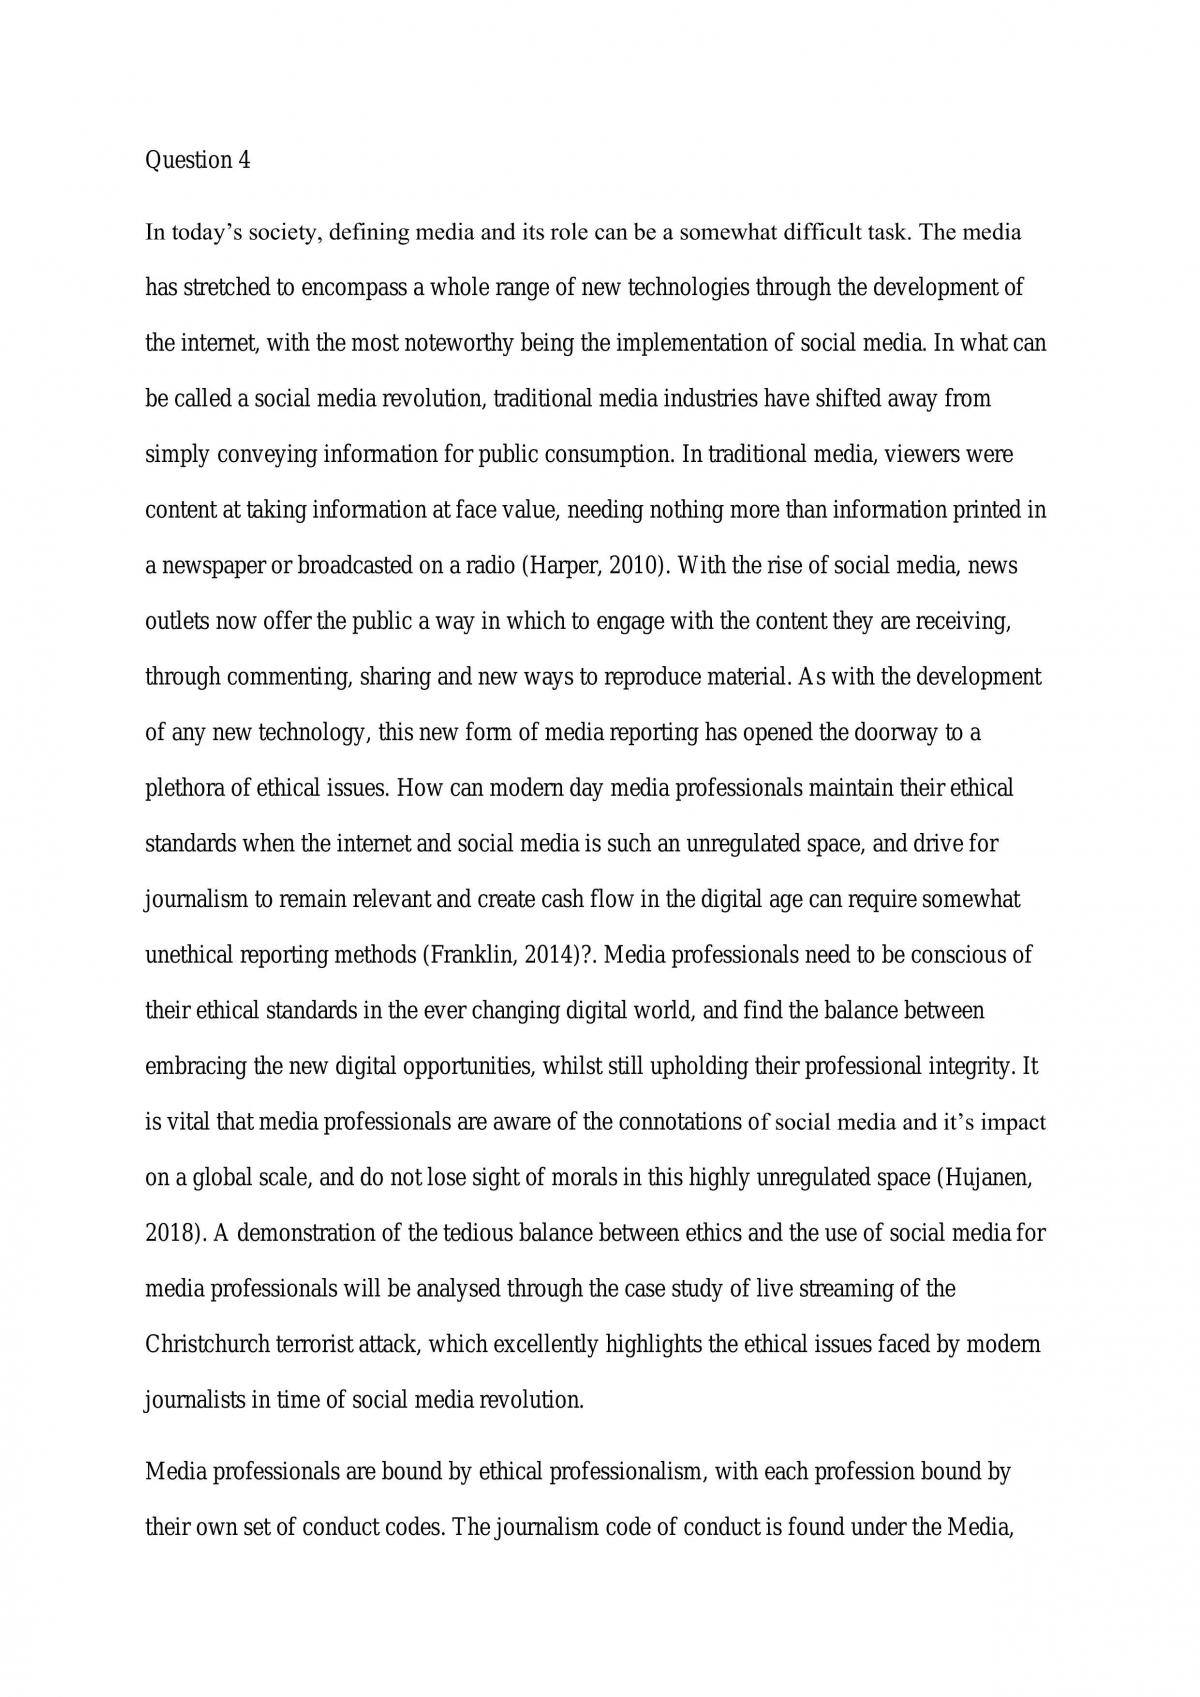 Final Essay for Media, Law and Ethics - Page 1